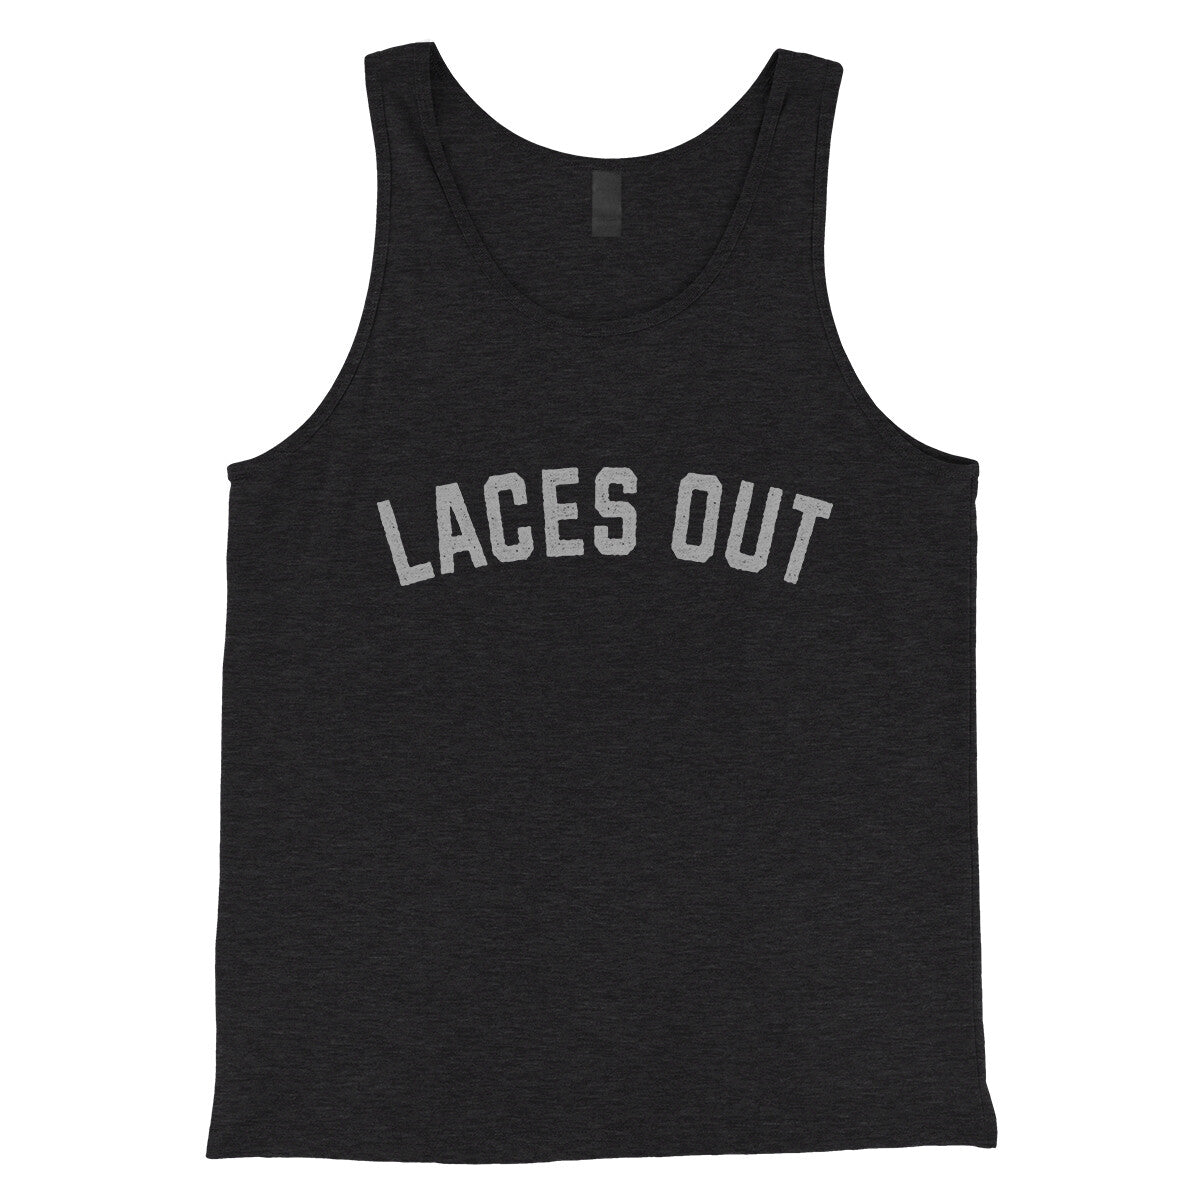 Laces Out in Charcoal Black TriBlend Color